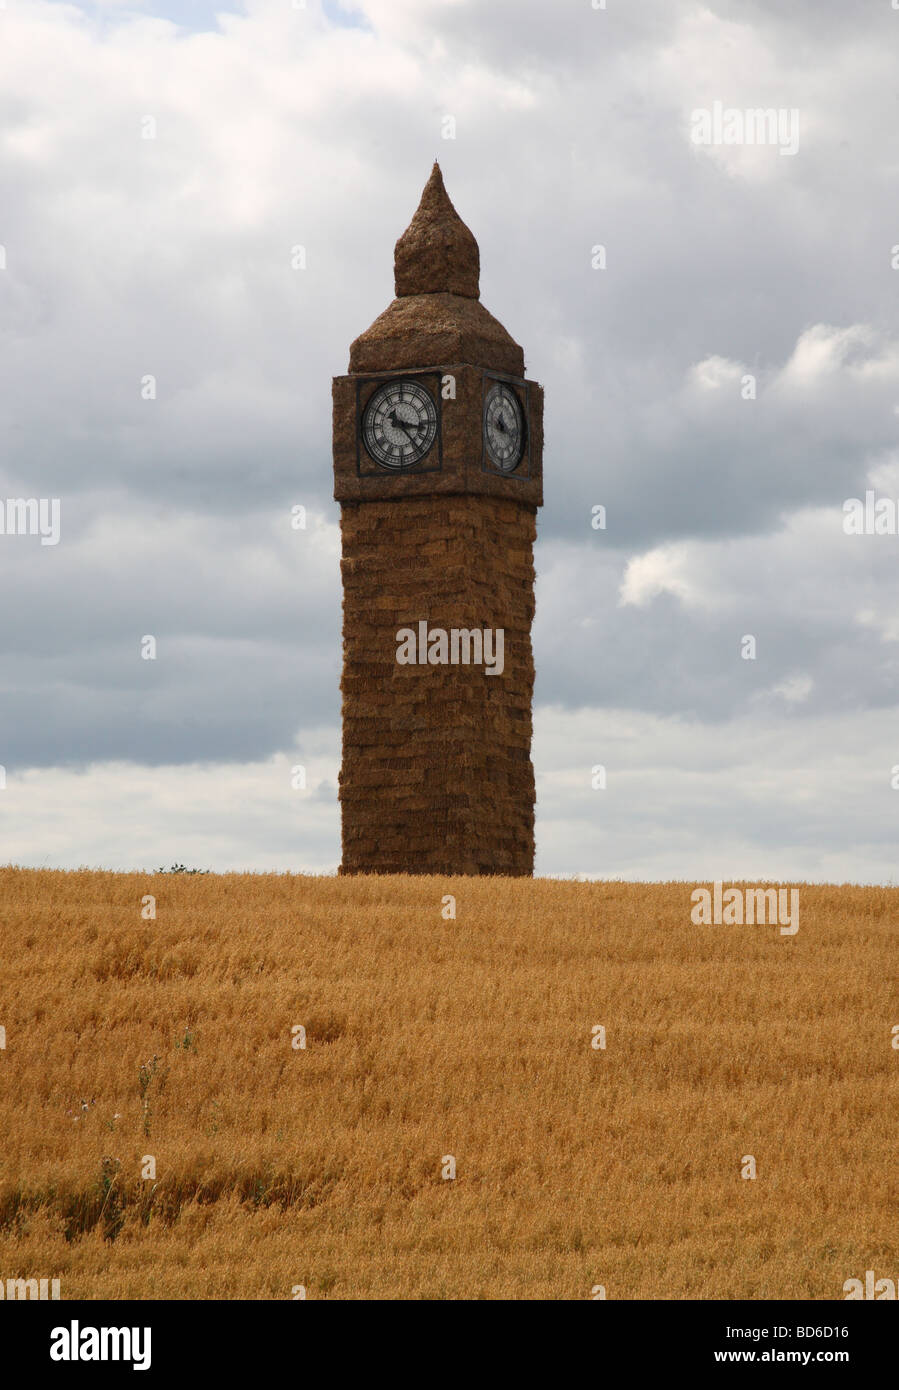 Big Ben made out of straw bales Stock Photo